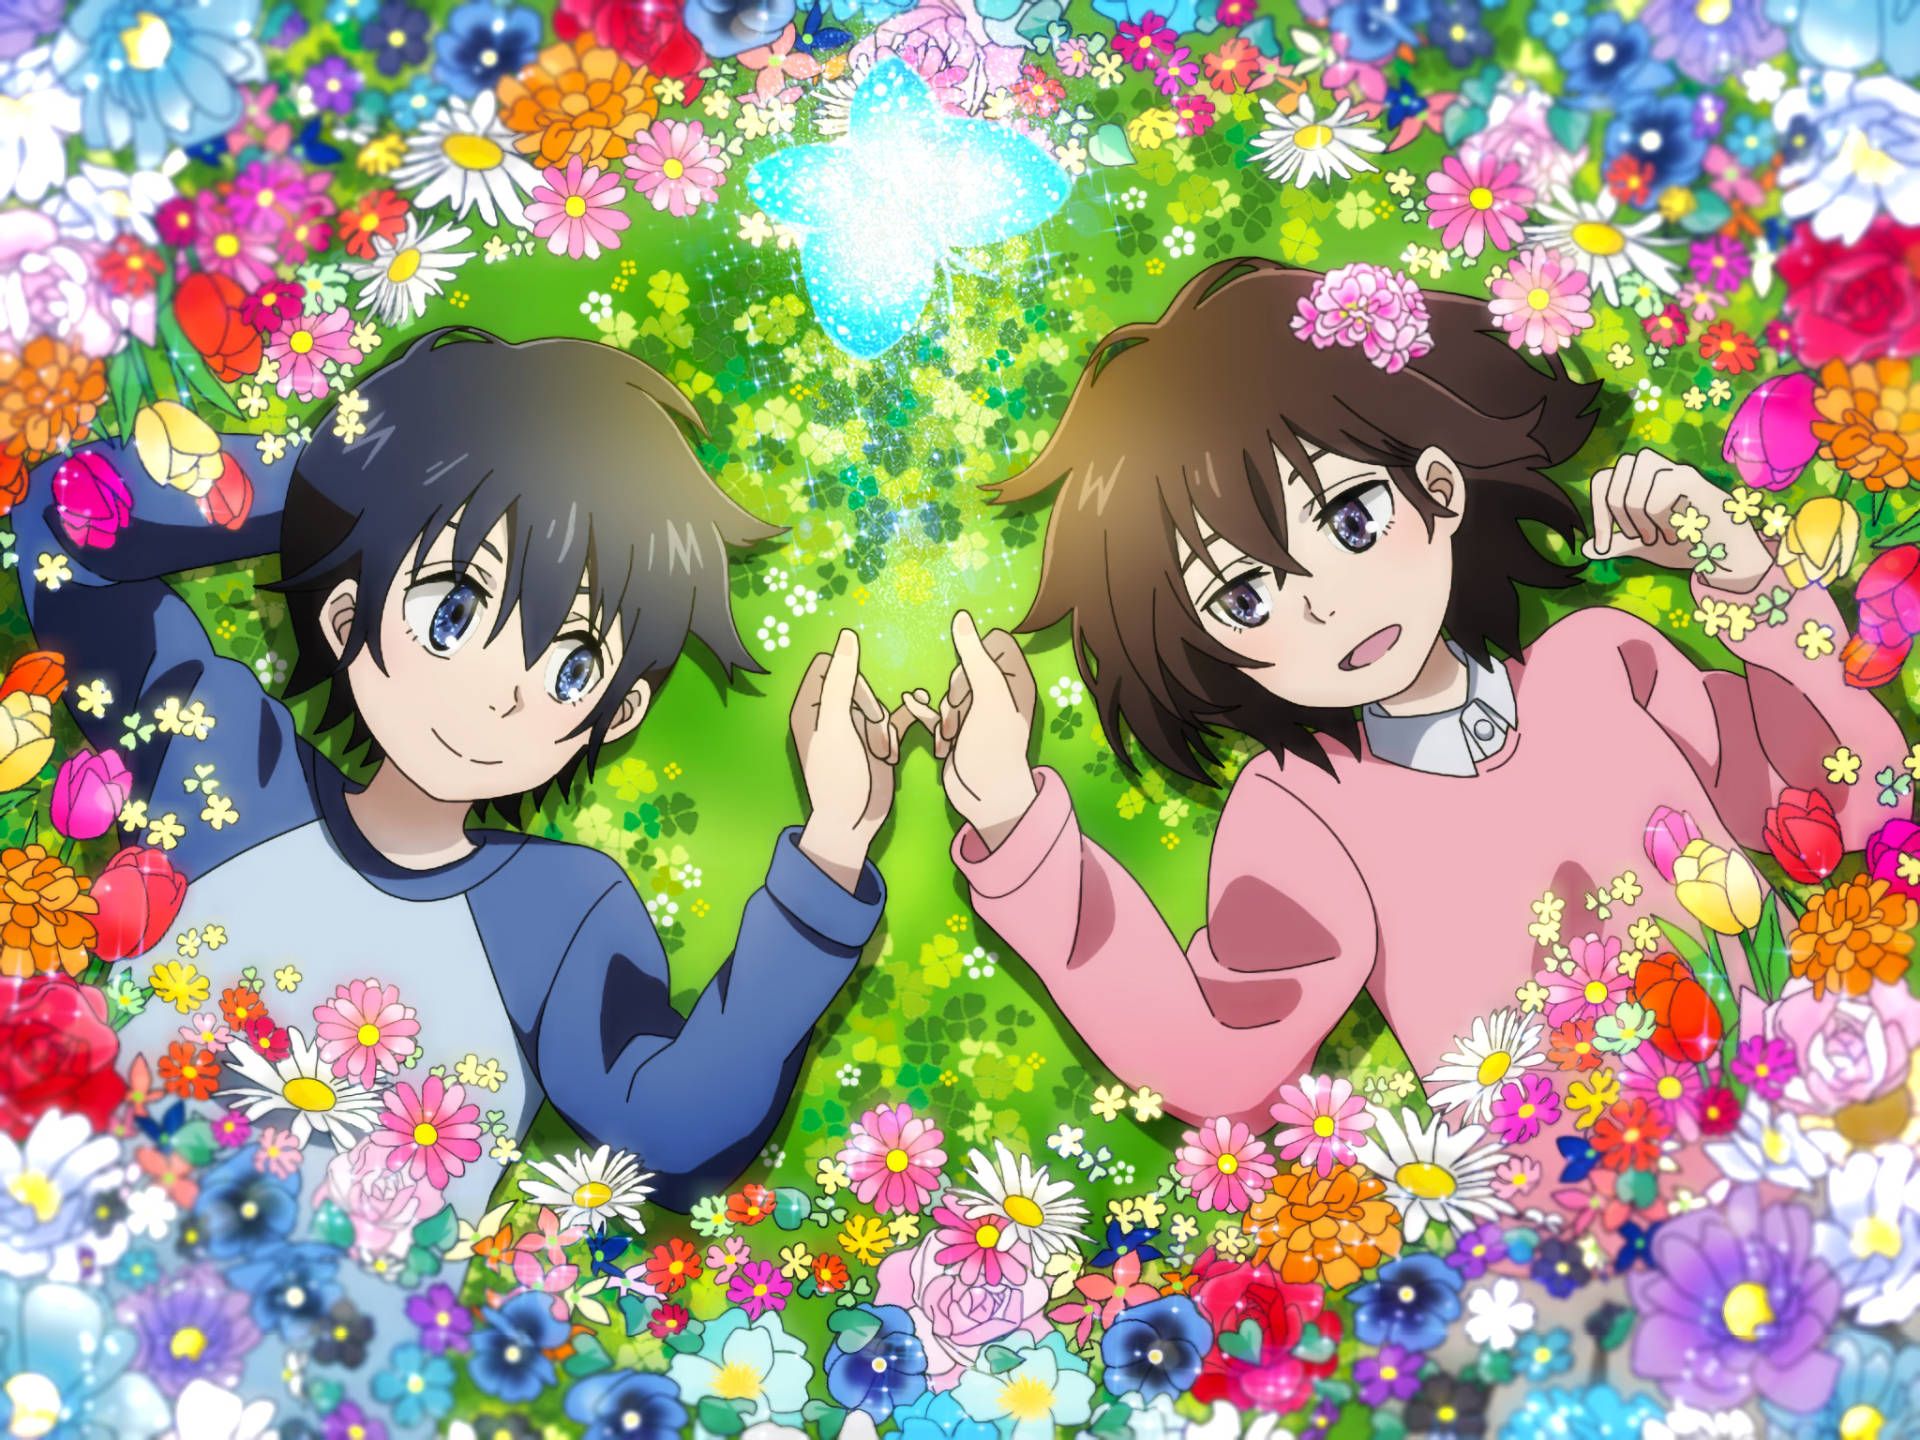 Erased In A Flowery Setting Wallpaper